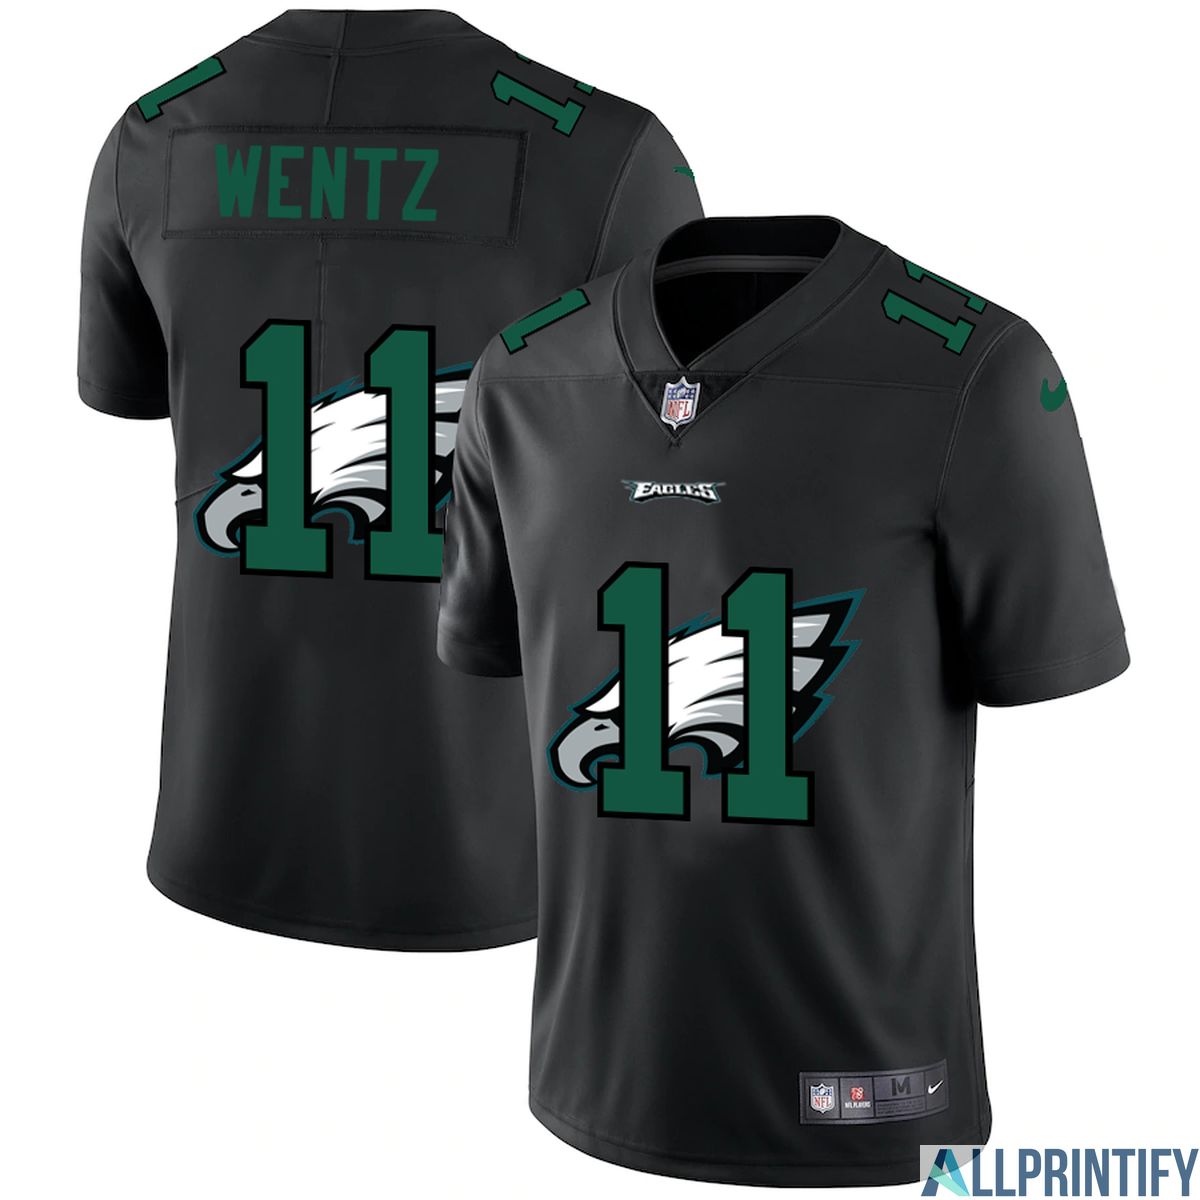 Carson Wentz Indianapolis Colts 2 Limited Player Jersey